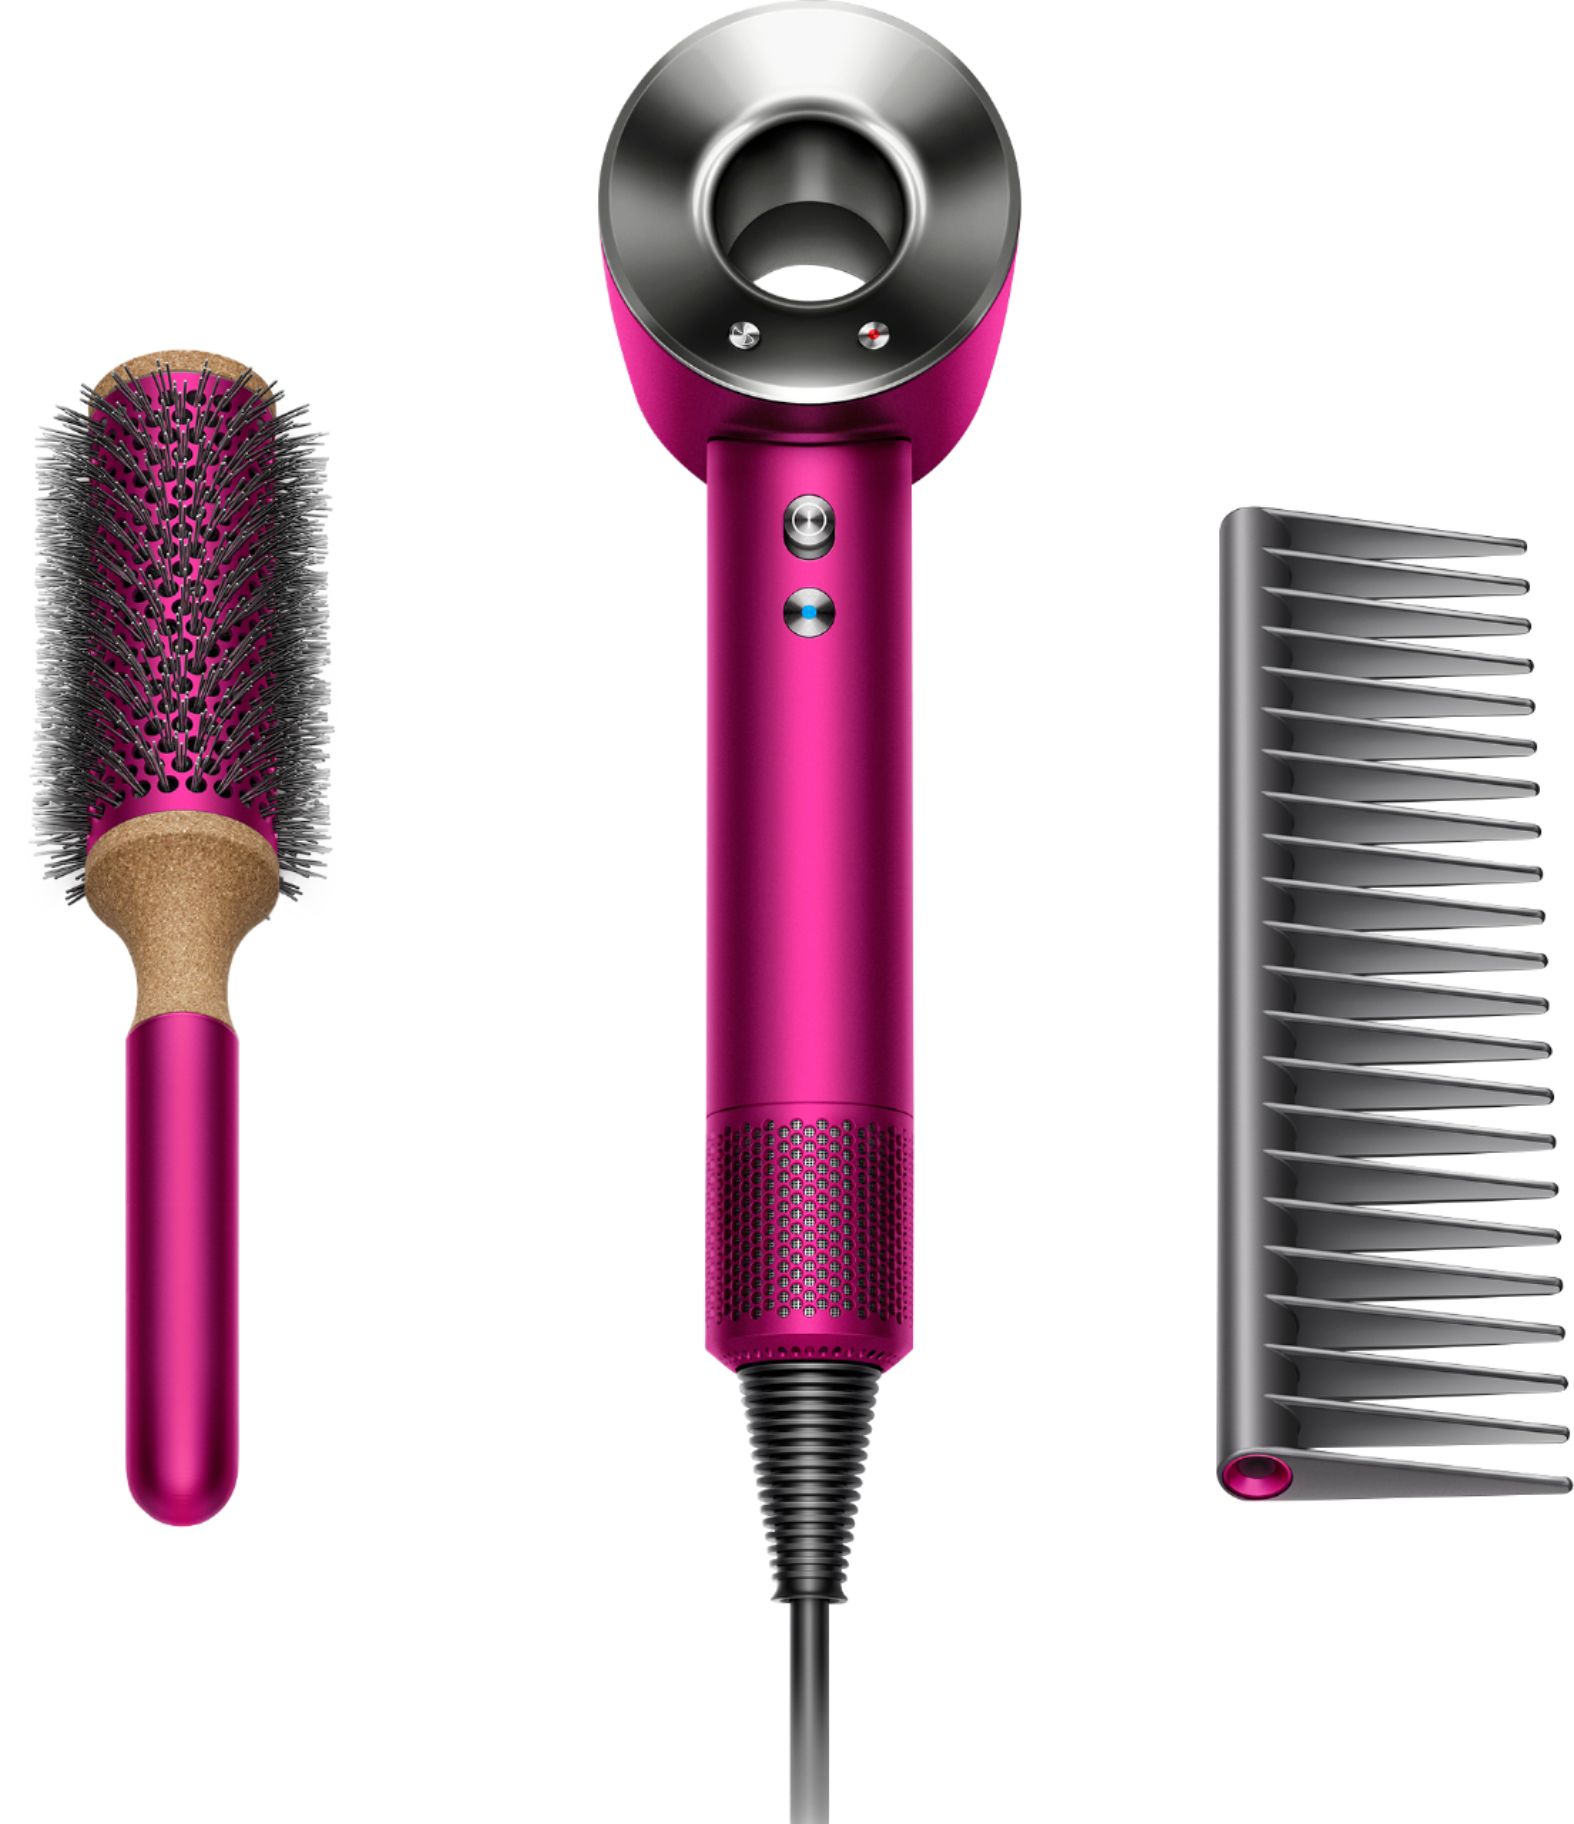 Dyson - Supersonic Hair Dryer - Limited Edition Gift Set - Fuchsia/Nickel